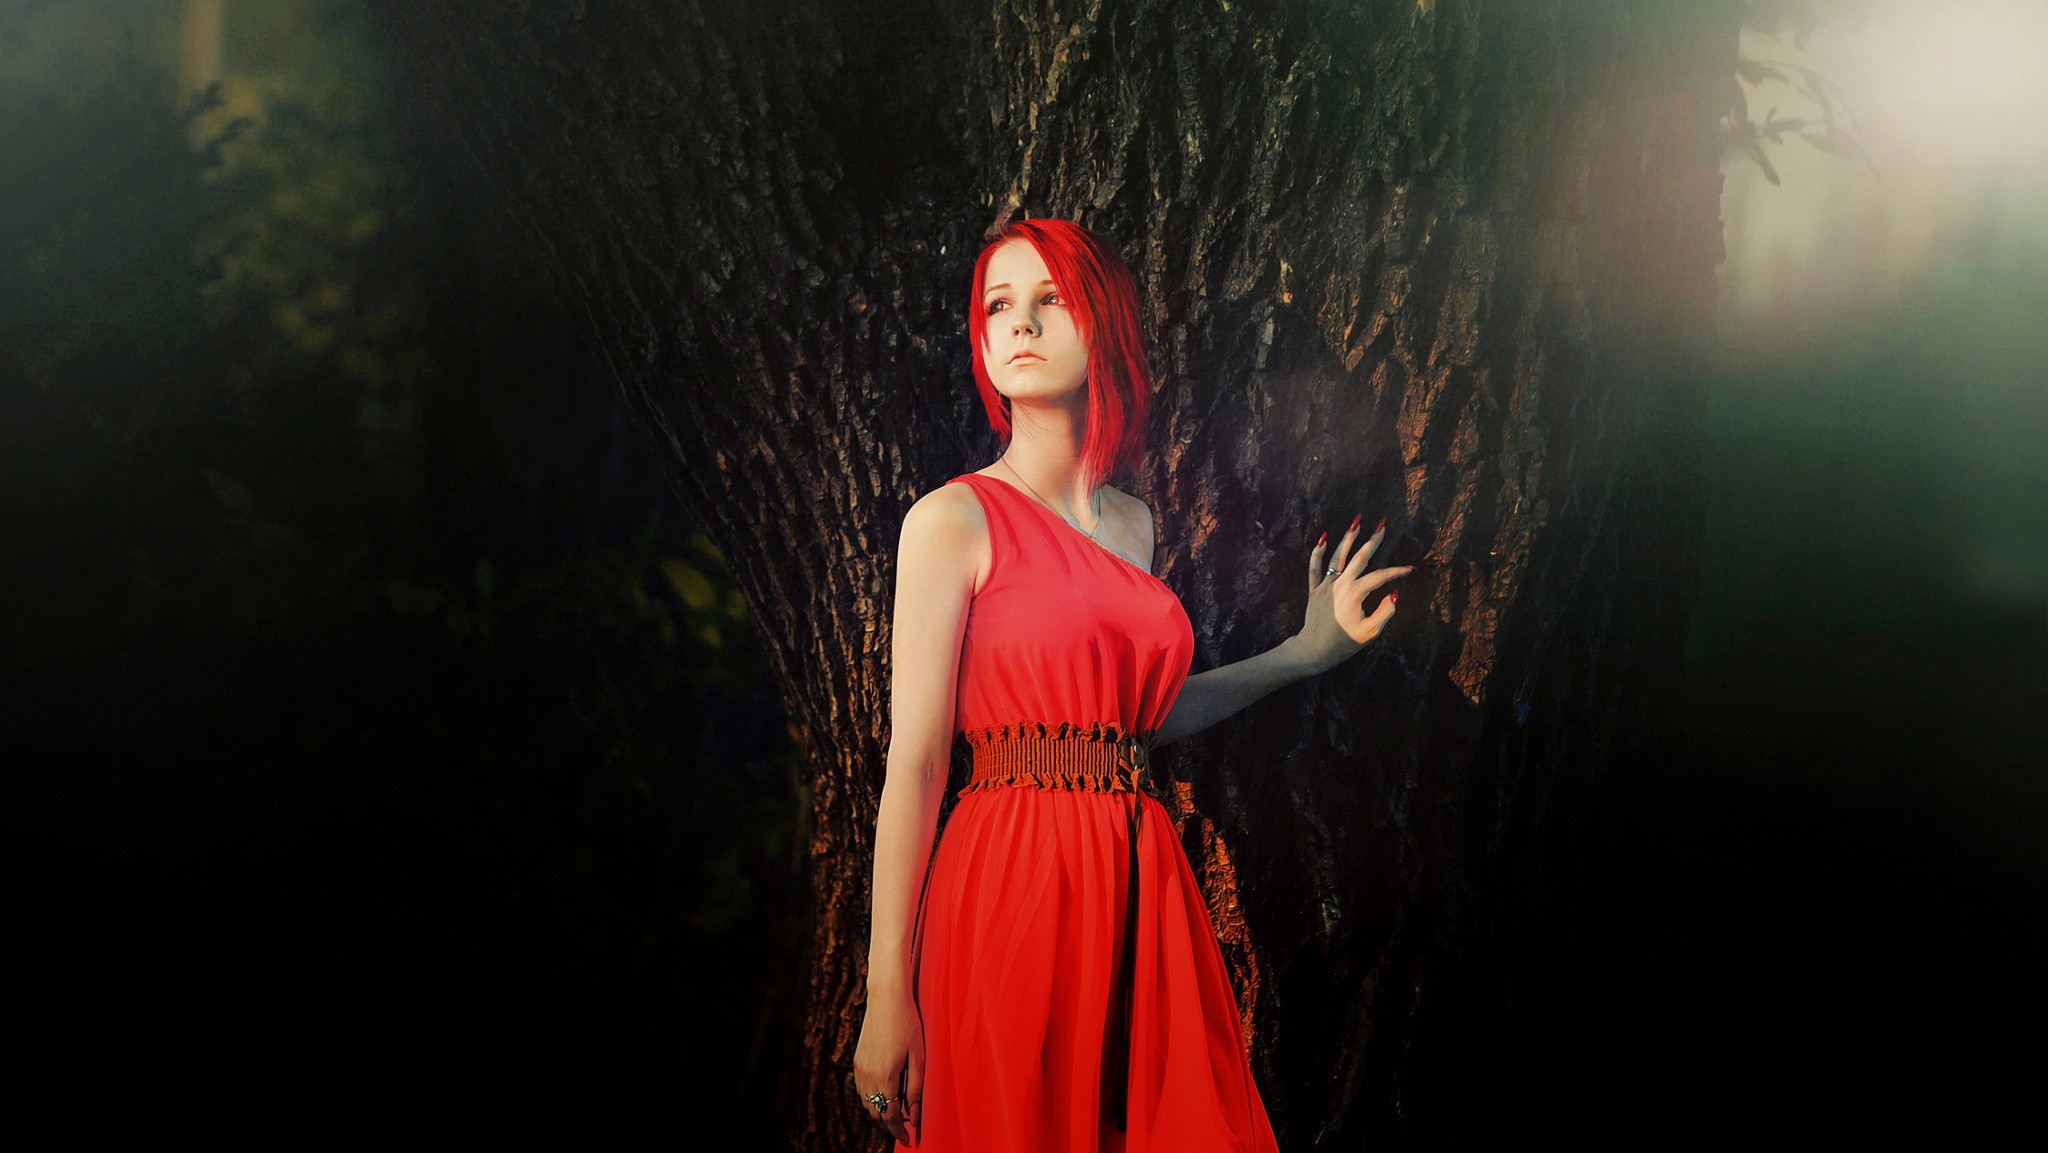 People 2048x1153 women model redhead red dress trees cosplay dyed hair dress red clothing looking up red nails painted nails women outdoors standing CGI